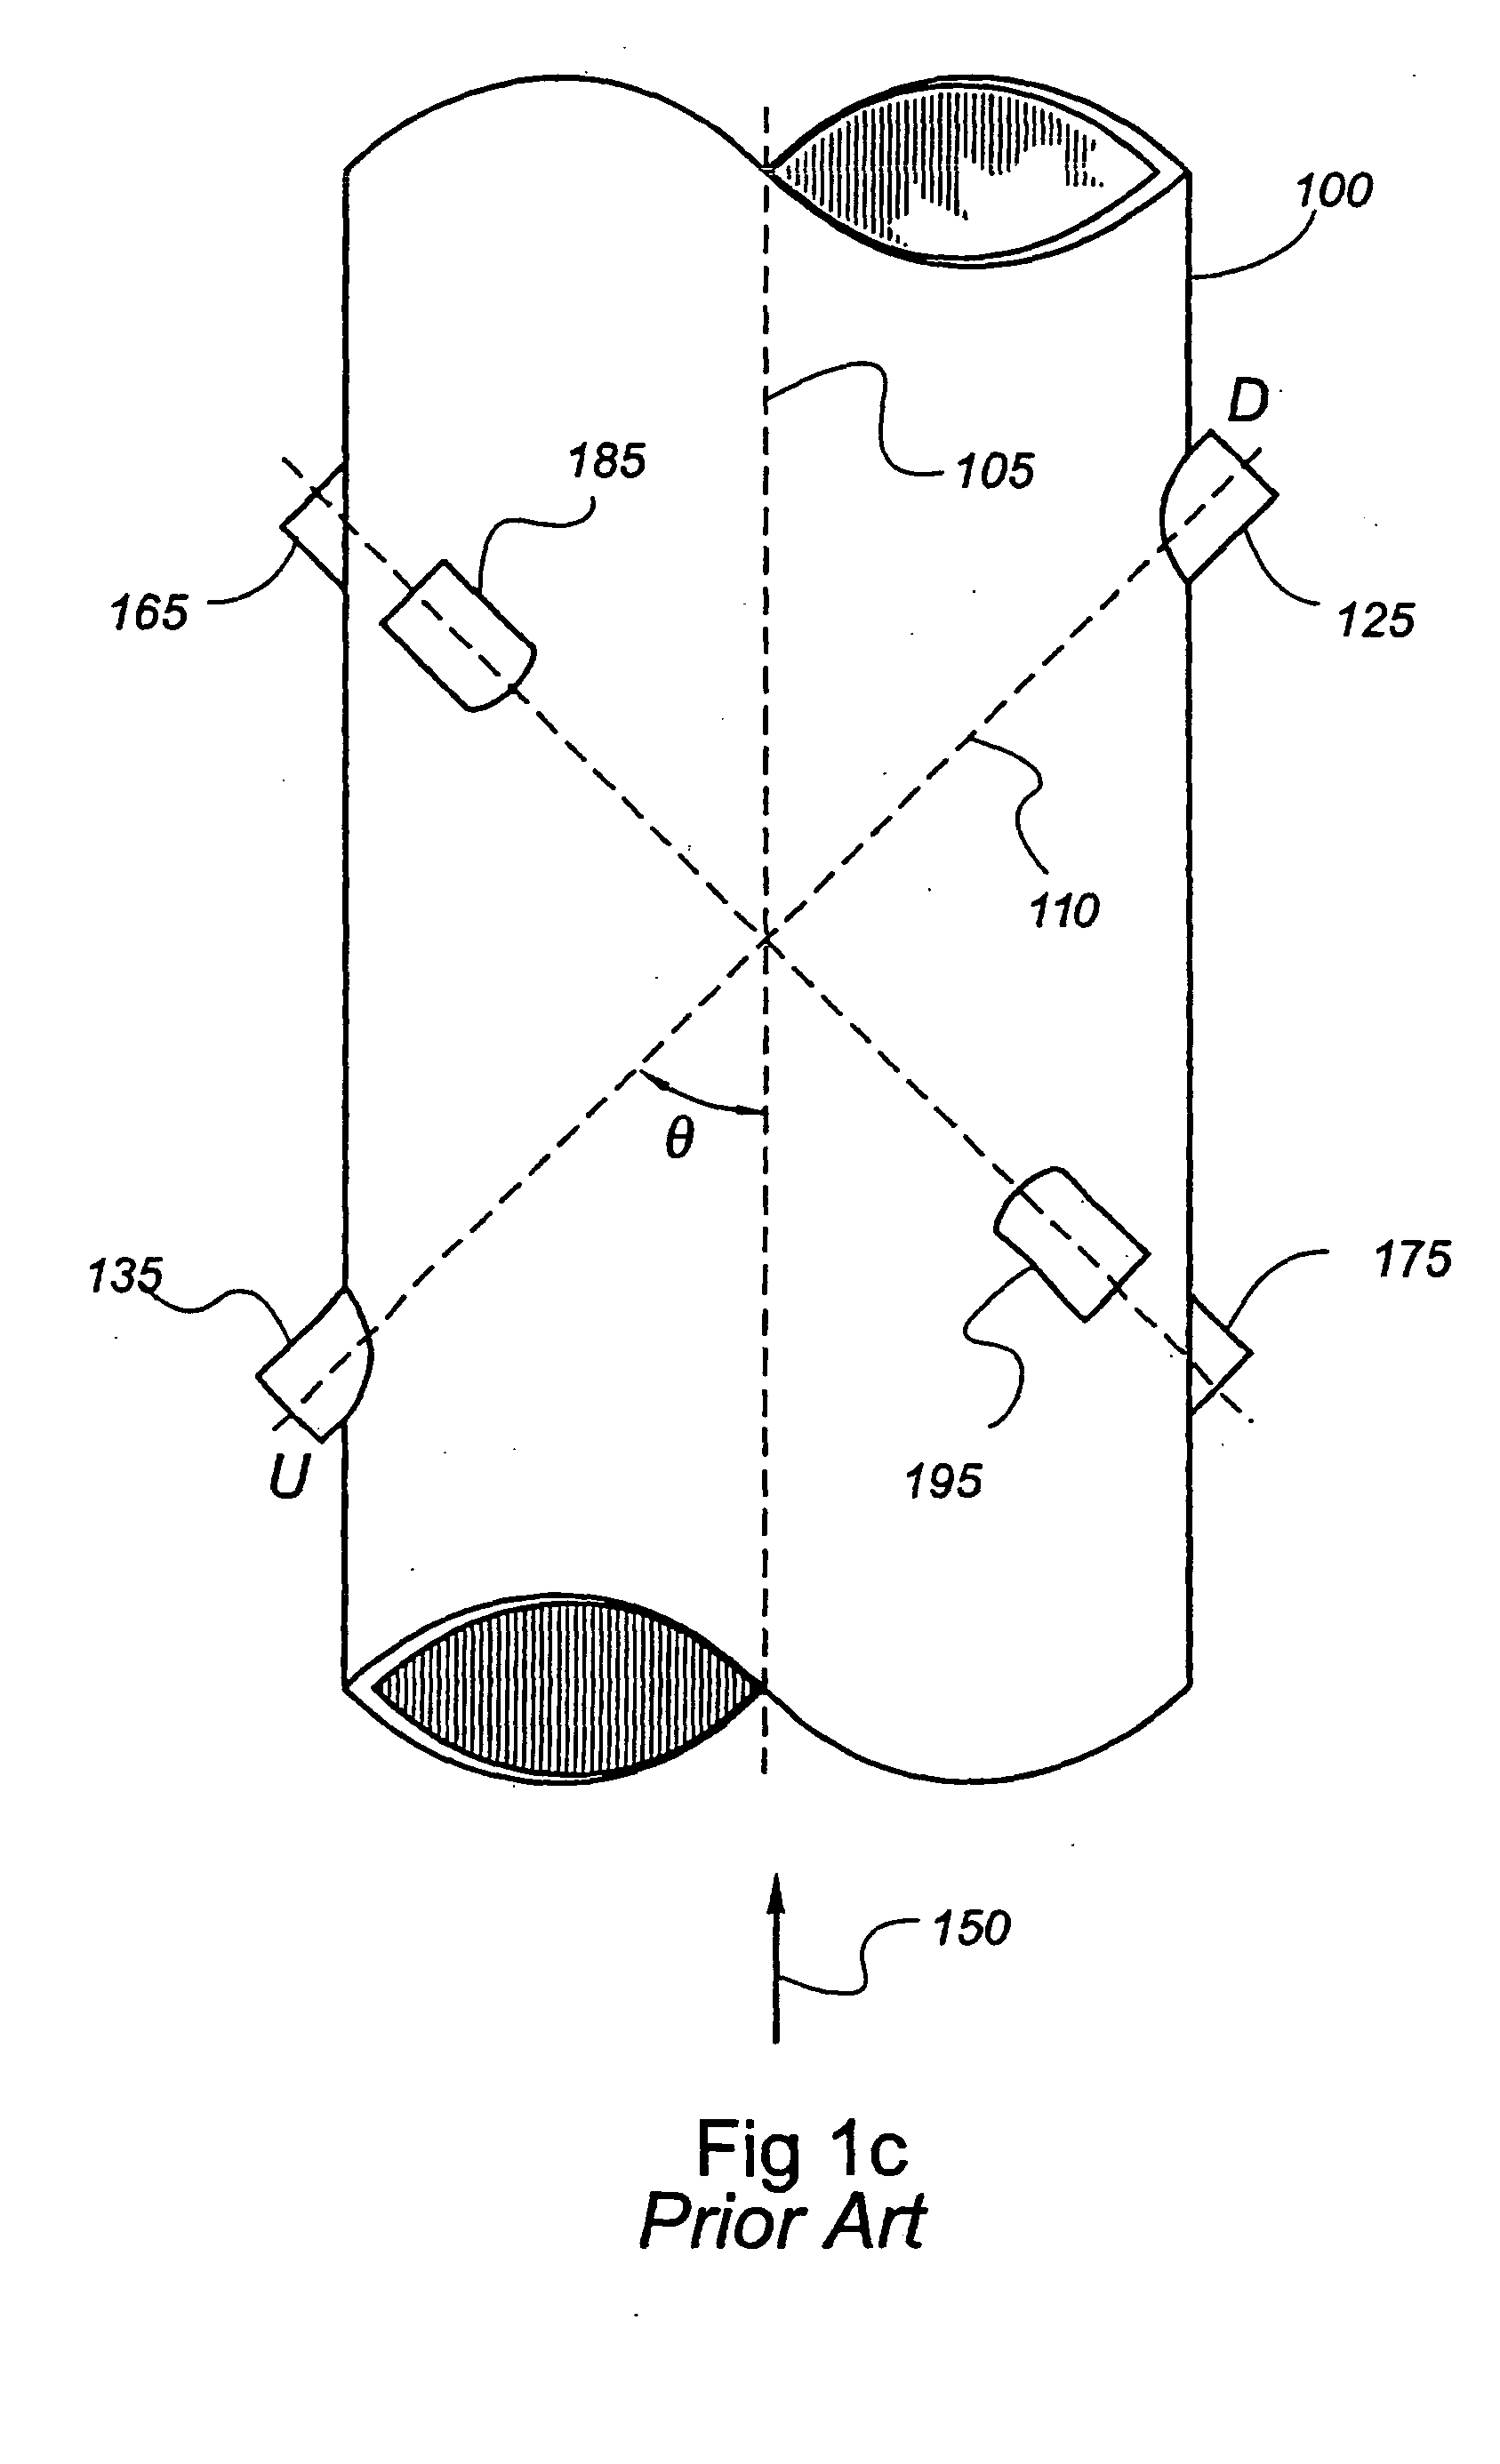 Method to snapshot and playback raw data in an ultrasonic meter